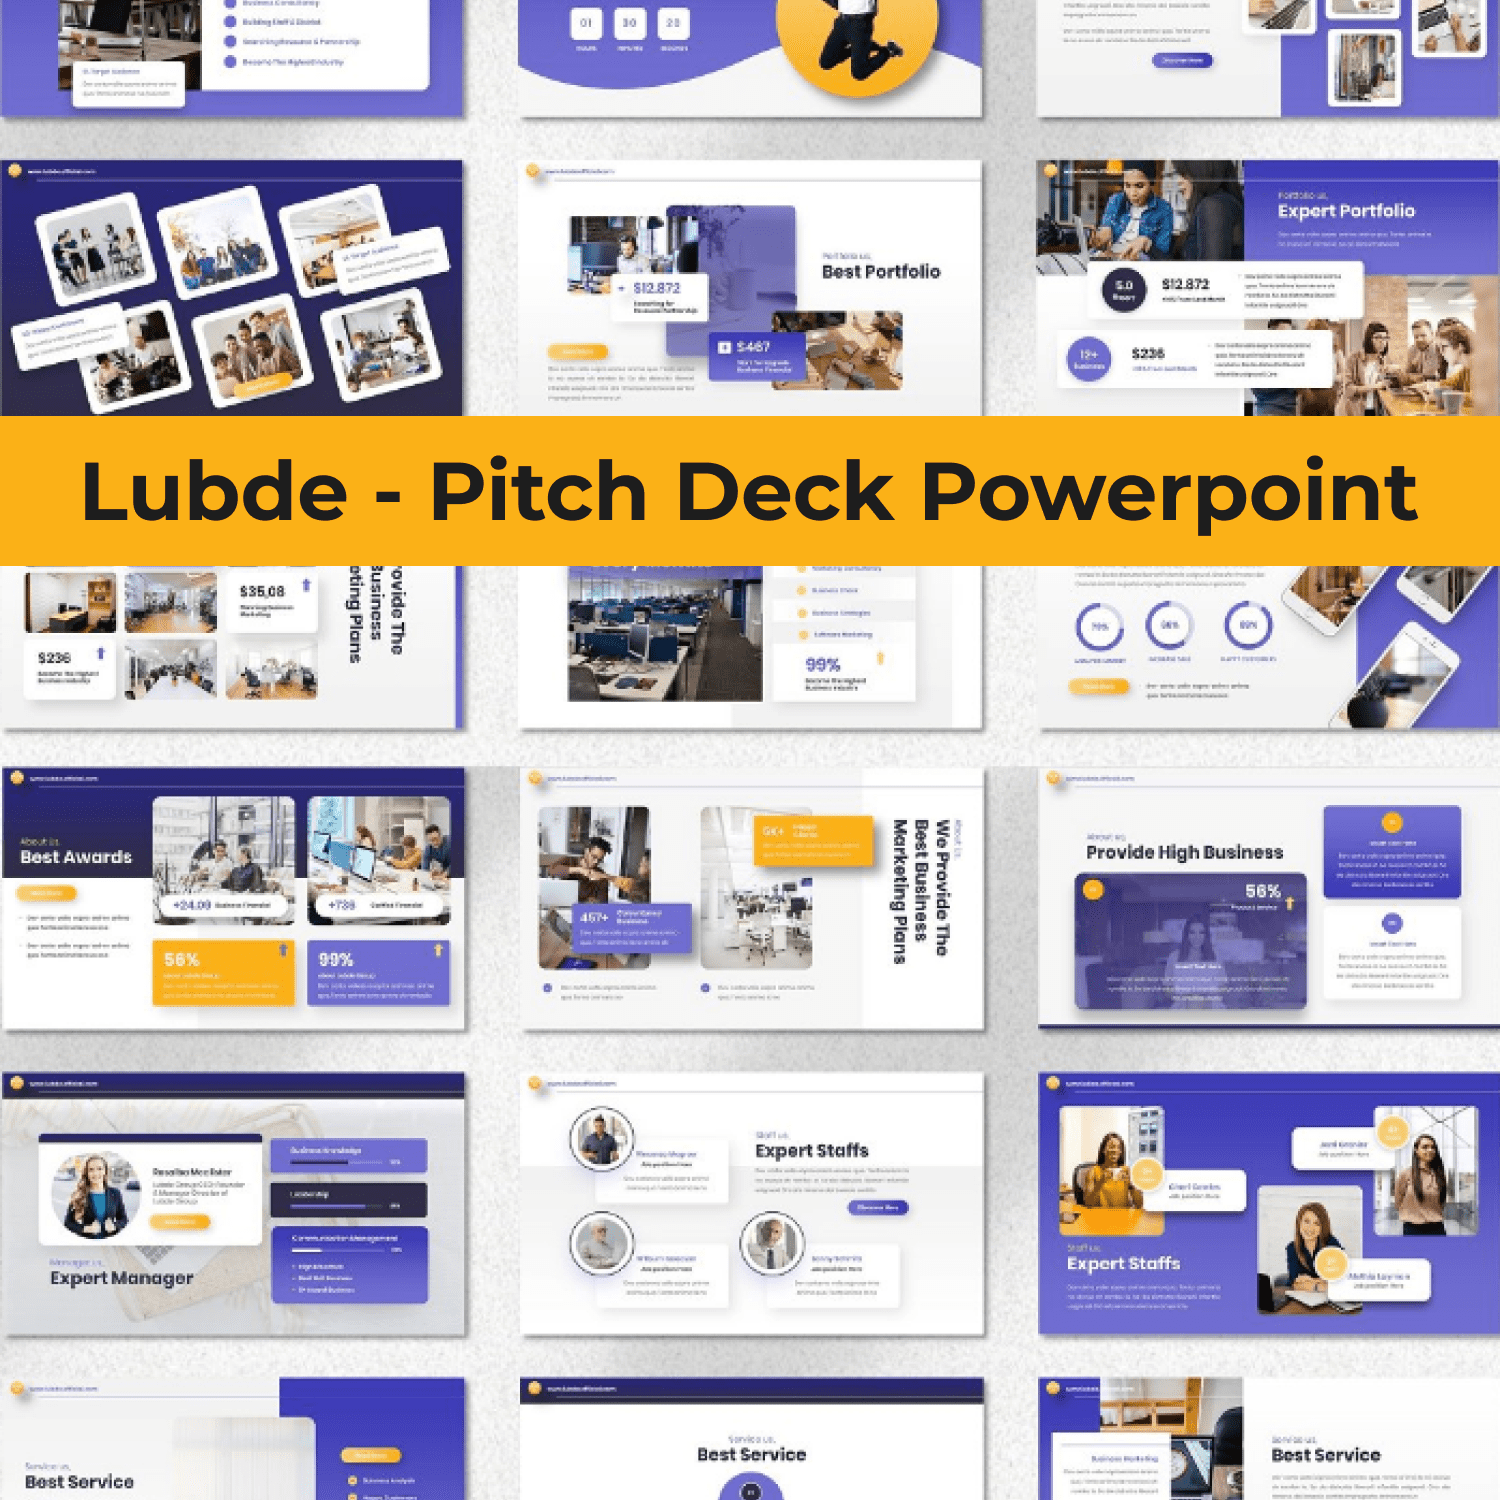 Lubde - Pitch Deck Powerpoint cover image.